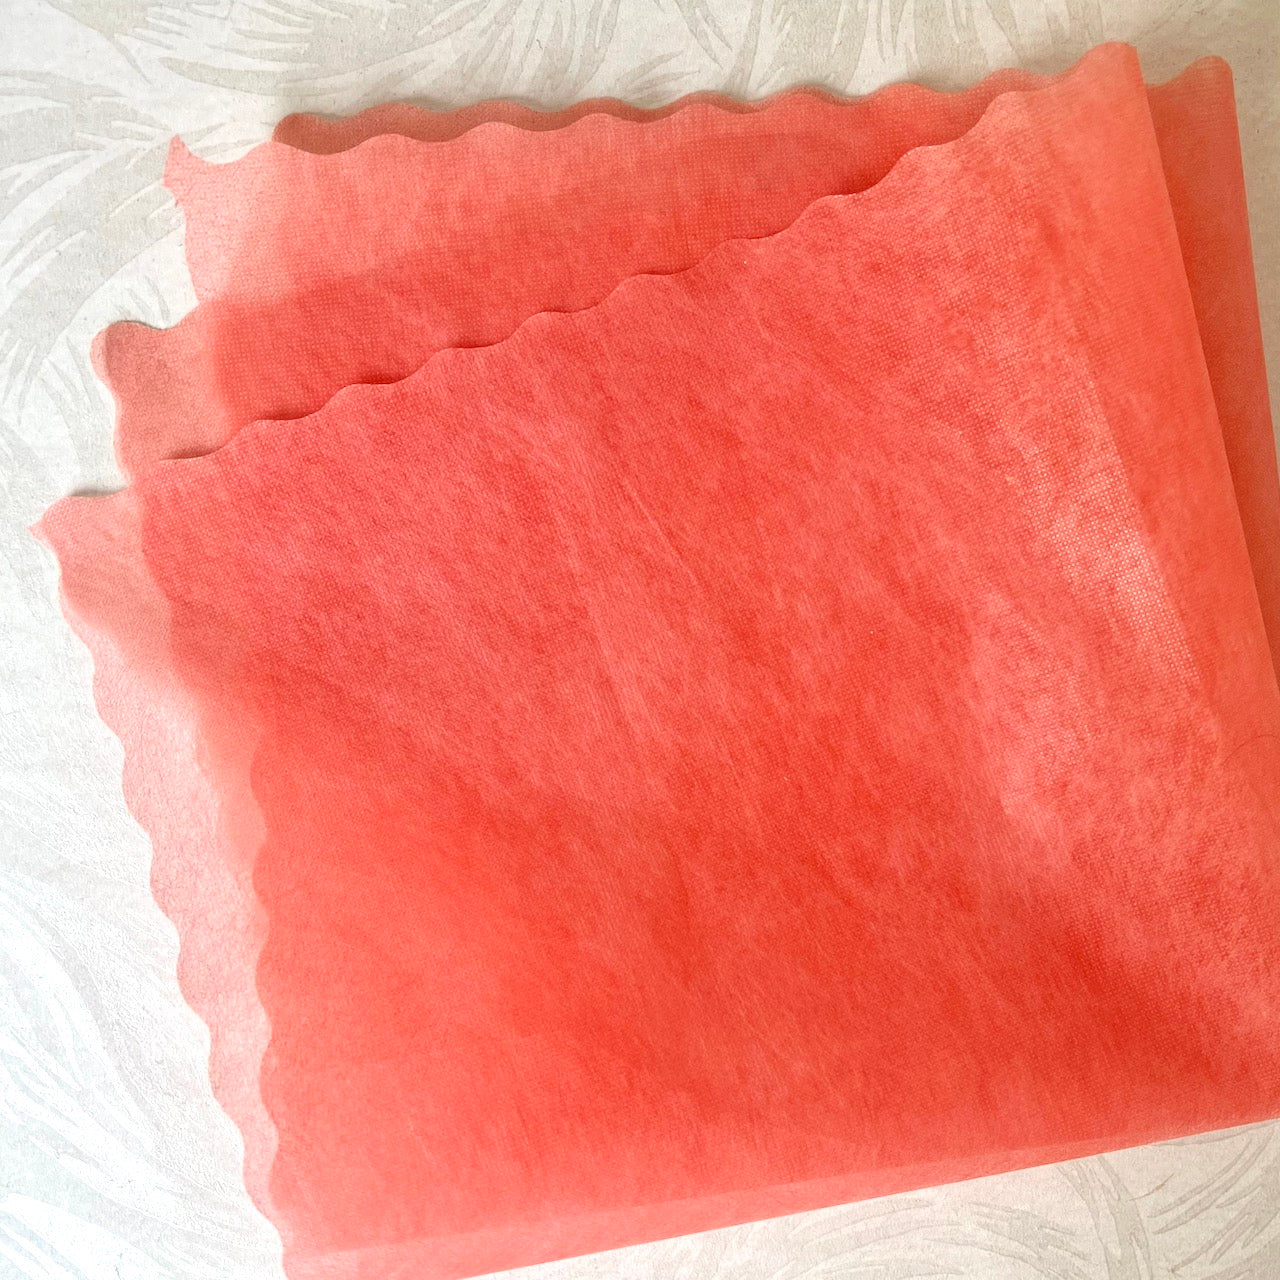 Mulberry Paper